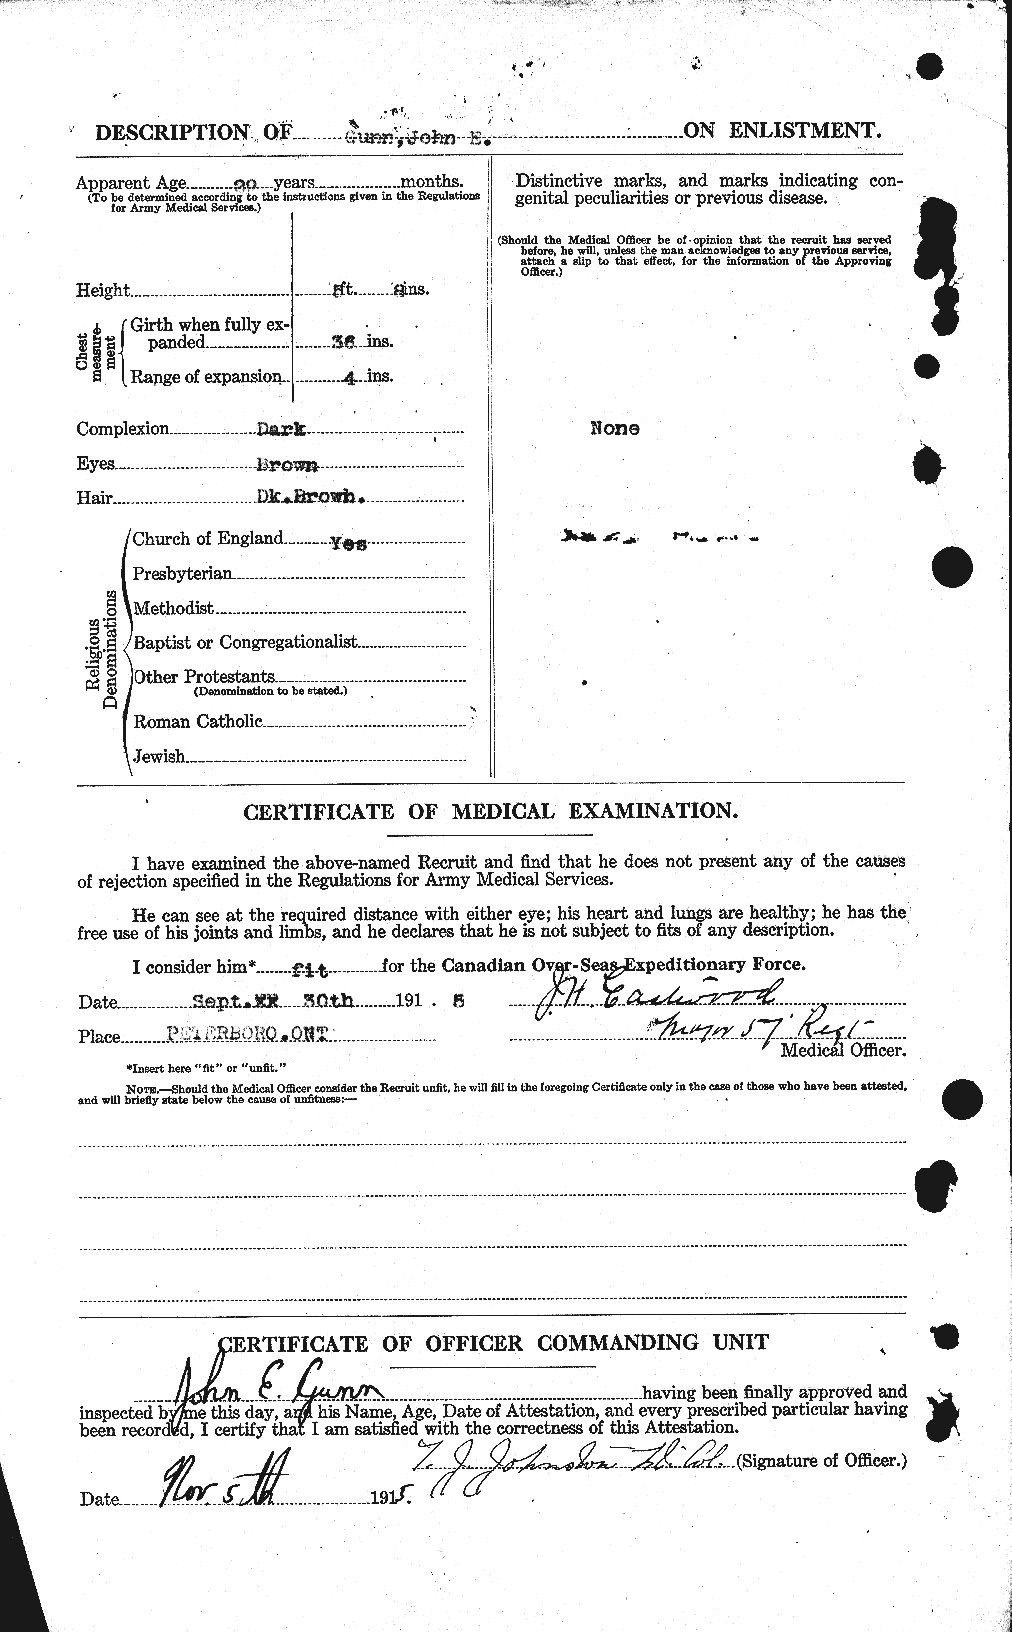 Personnel Records of the First World War - CEF 369294b